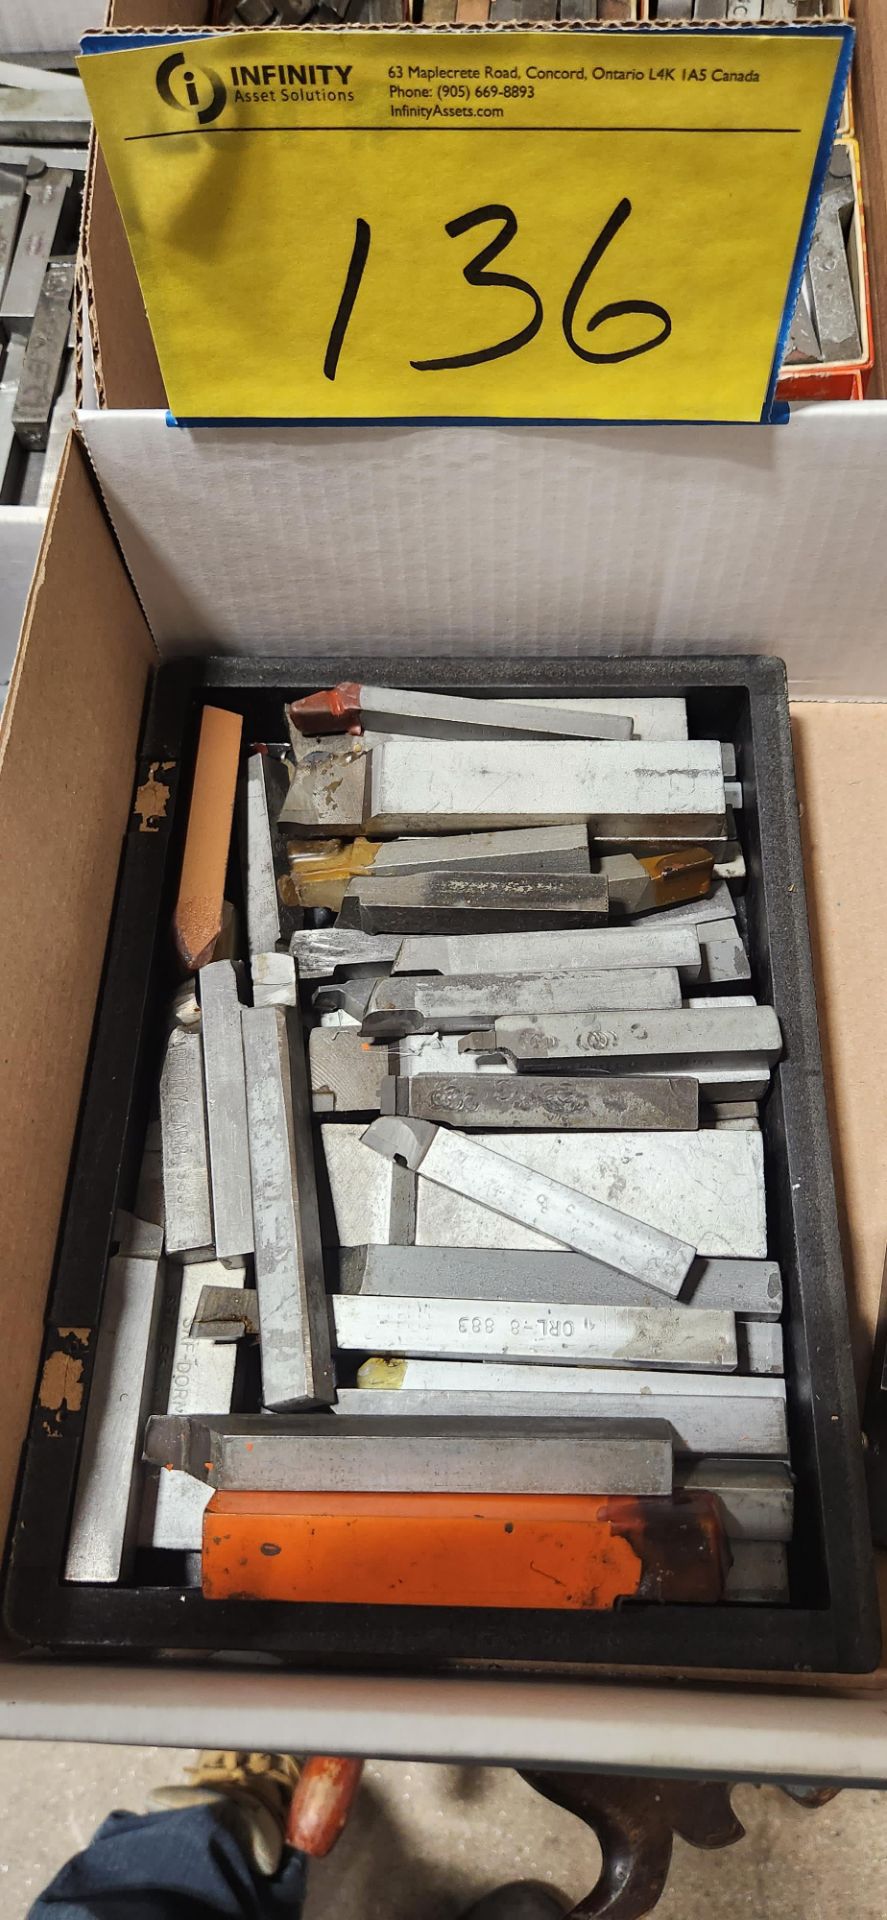 LOT ASST. CUTTING TOOLS (2 BOXES) - Image 3 of 3